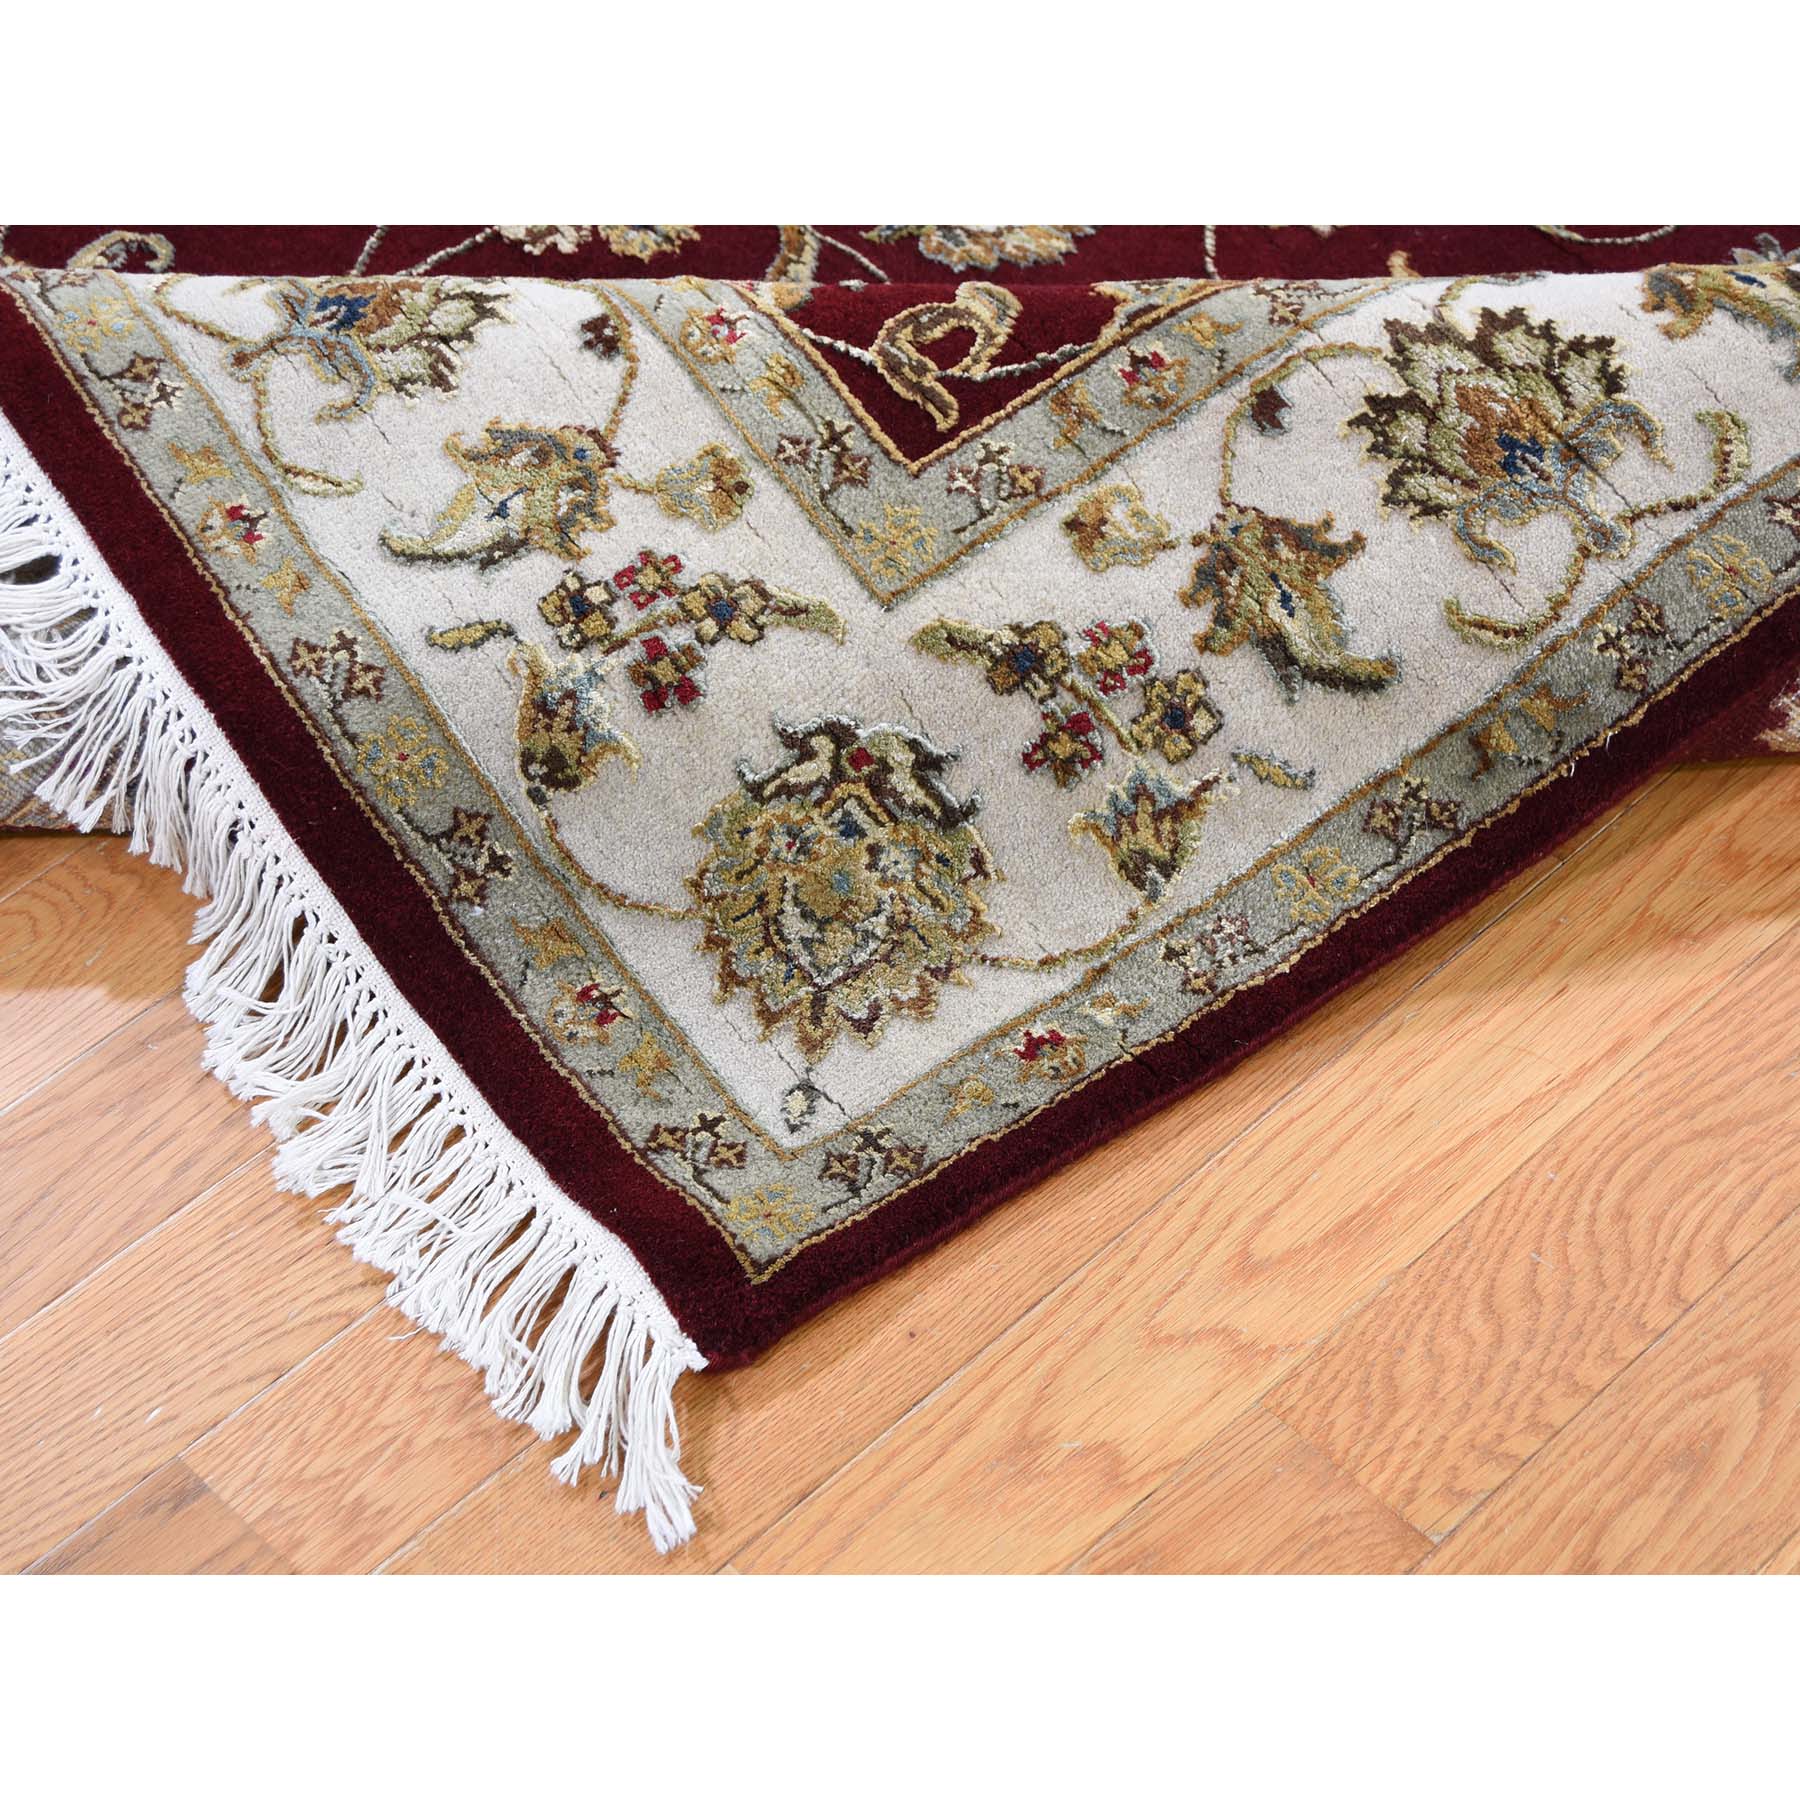 5-1 x7-1  Rajasthan  Wool And Silk Hand-Knotted Oriental Rug 